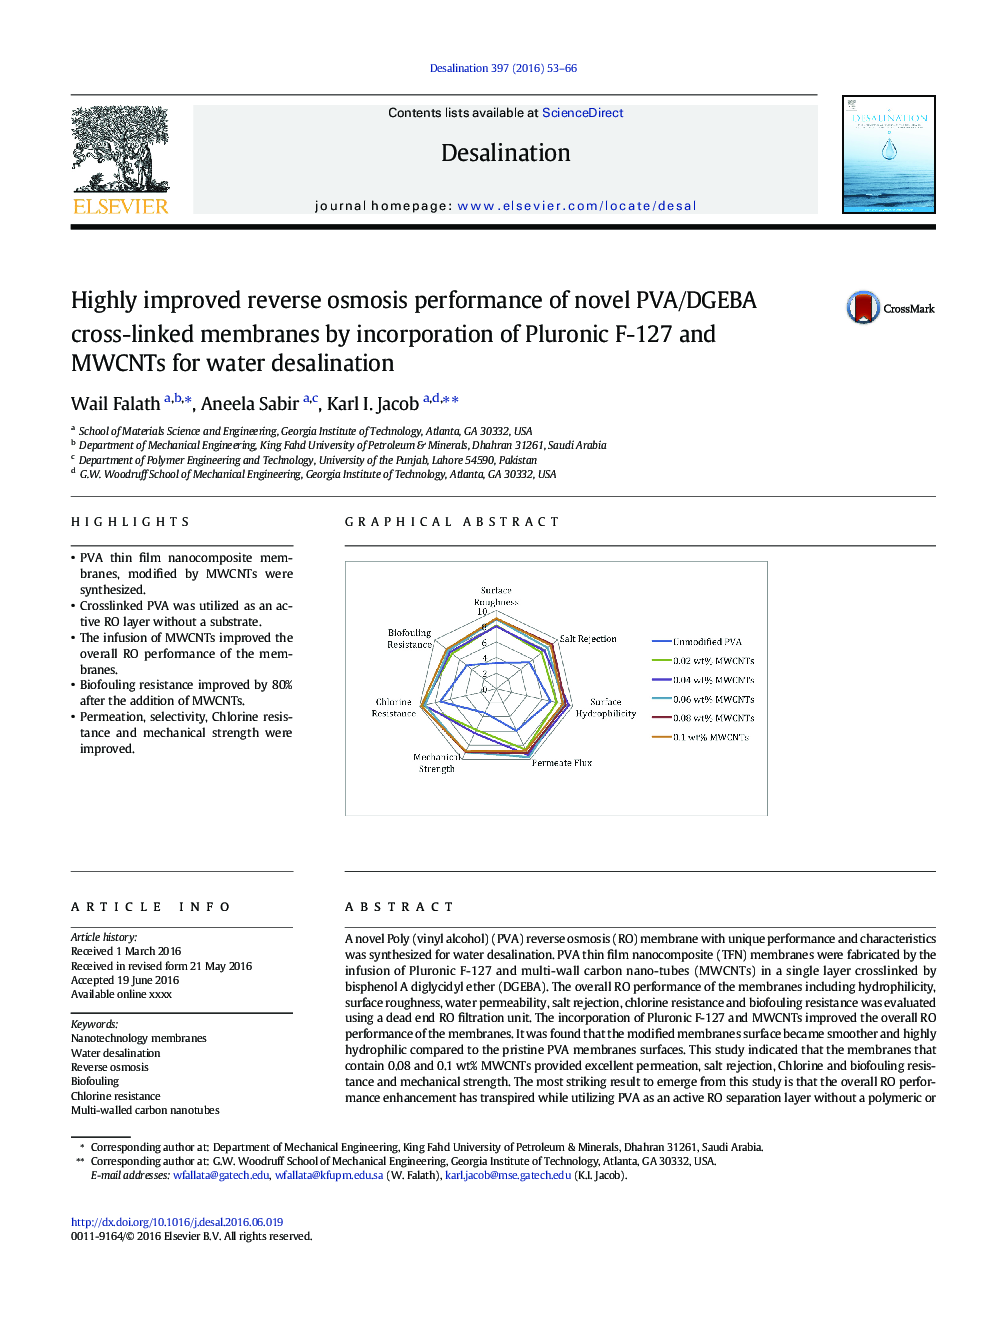 Highly improved reverse osmosis performance of novel PVA/DGEBA cross-linked membranes by incorporation of Pluronic F-127 and MWCNTs for water desalination